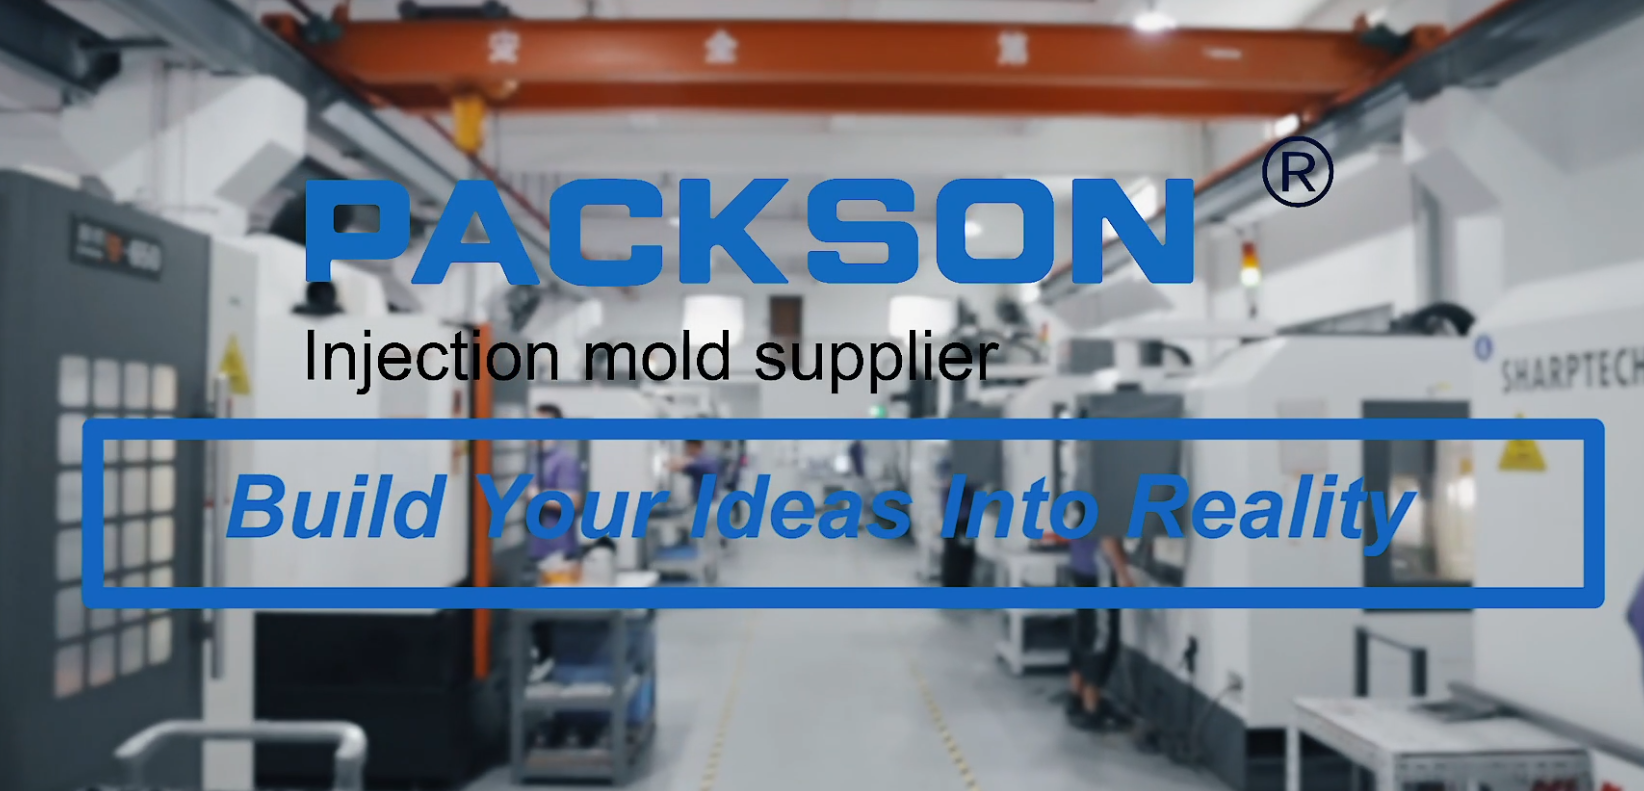 Packson Mold